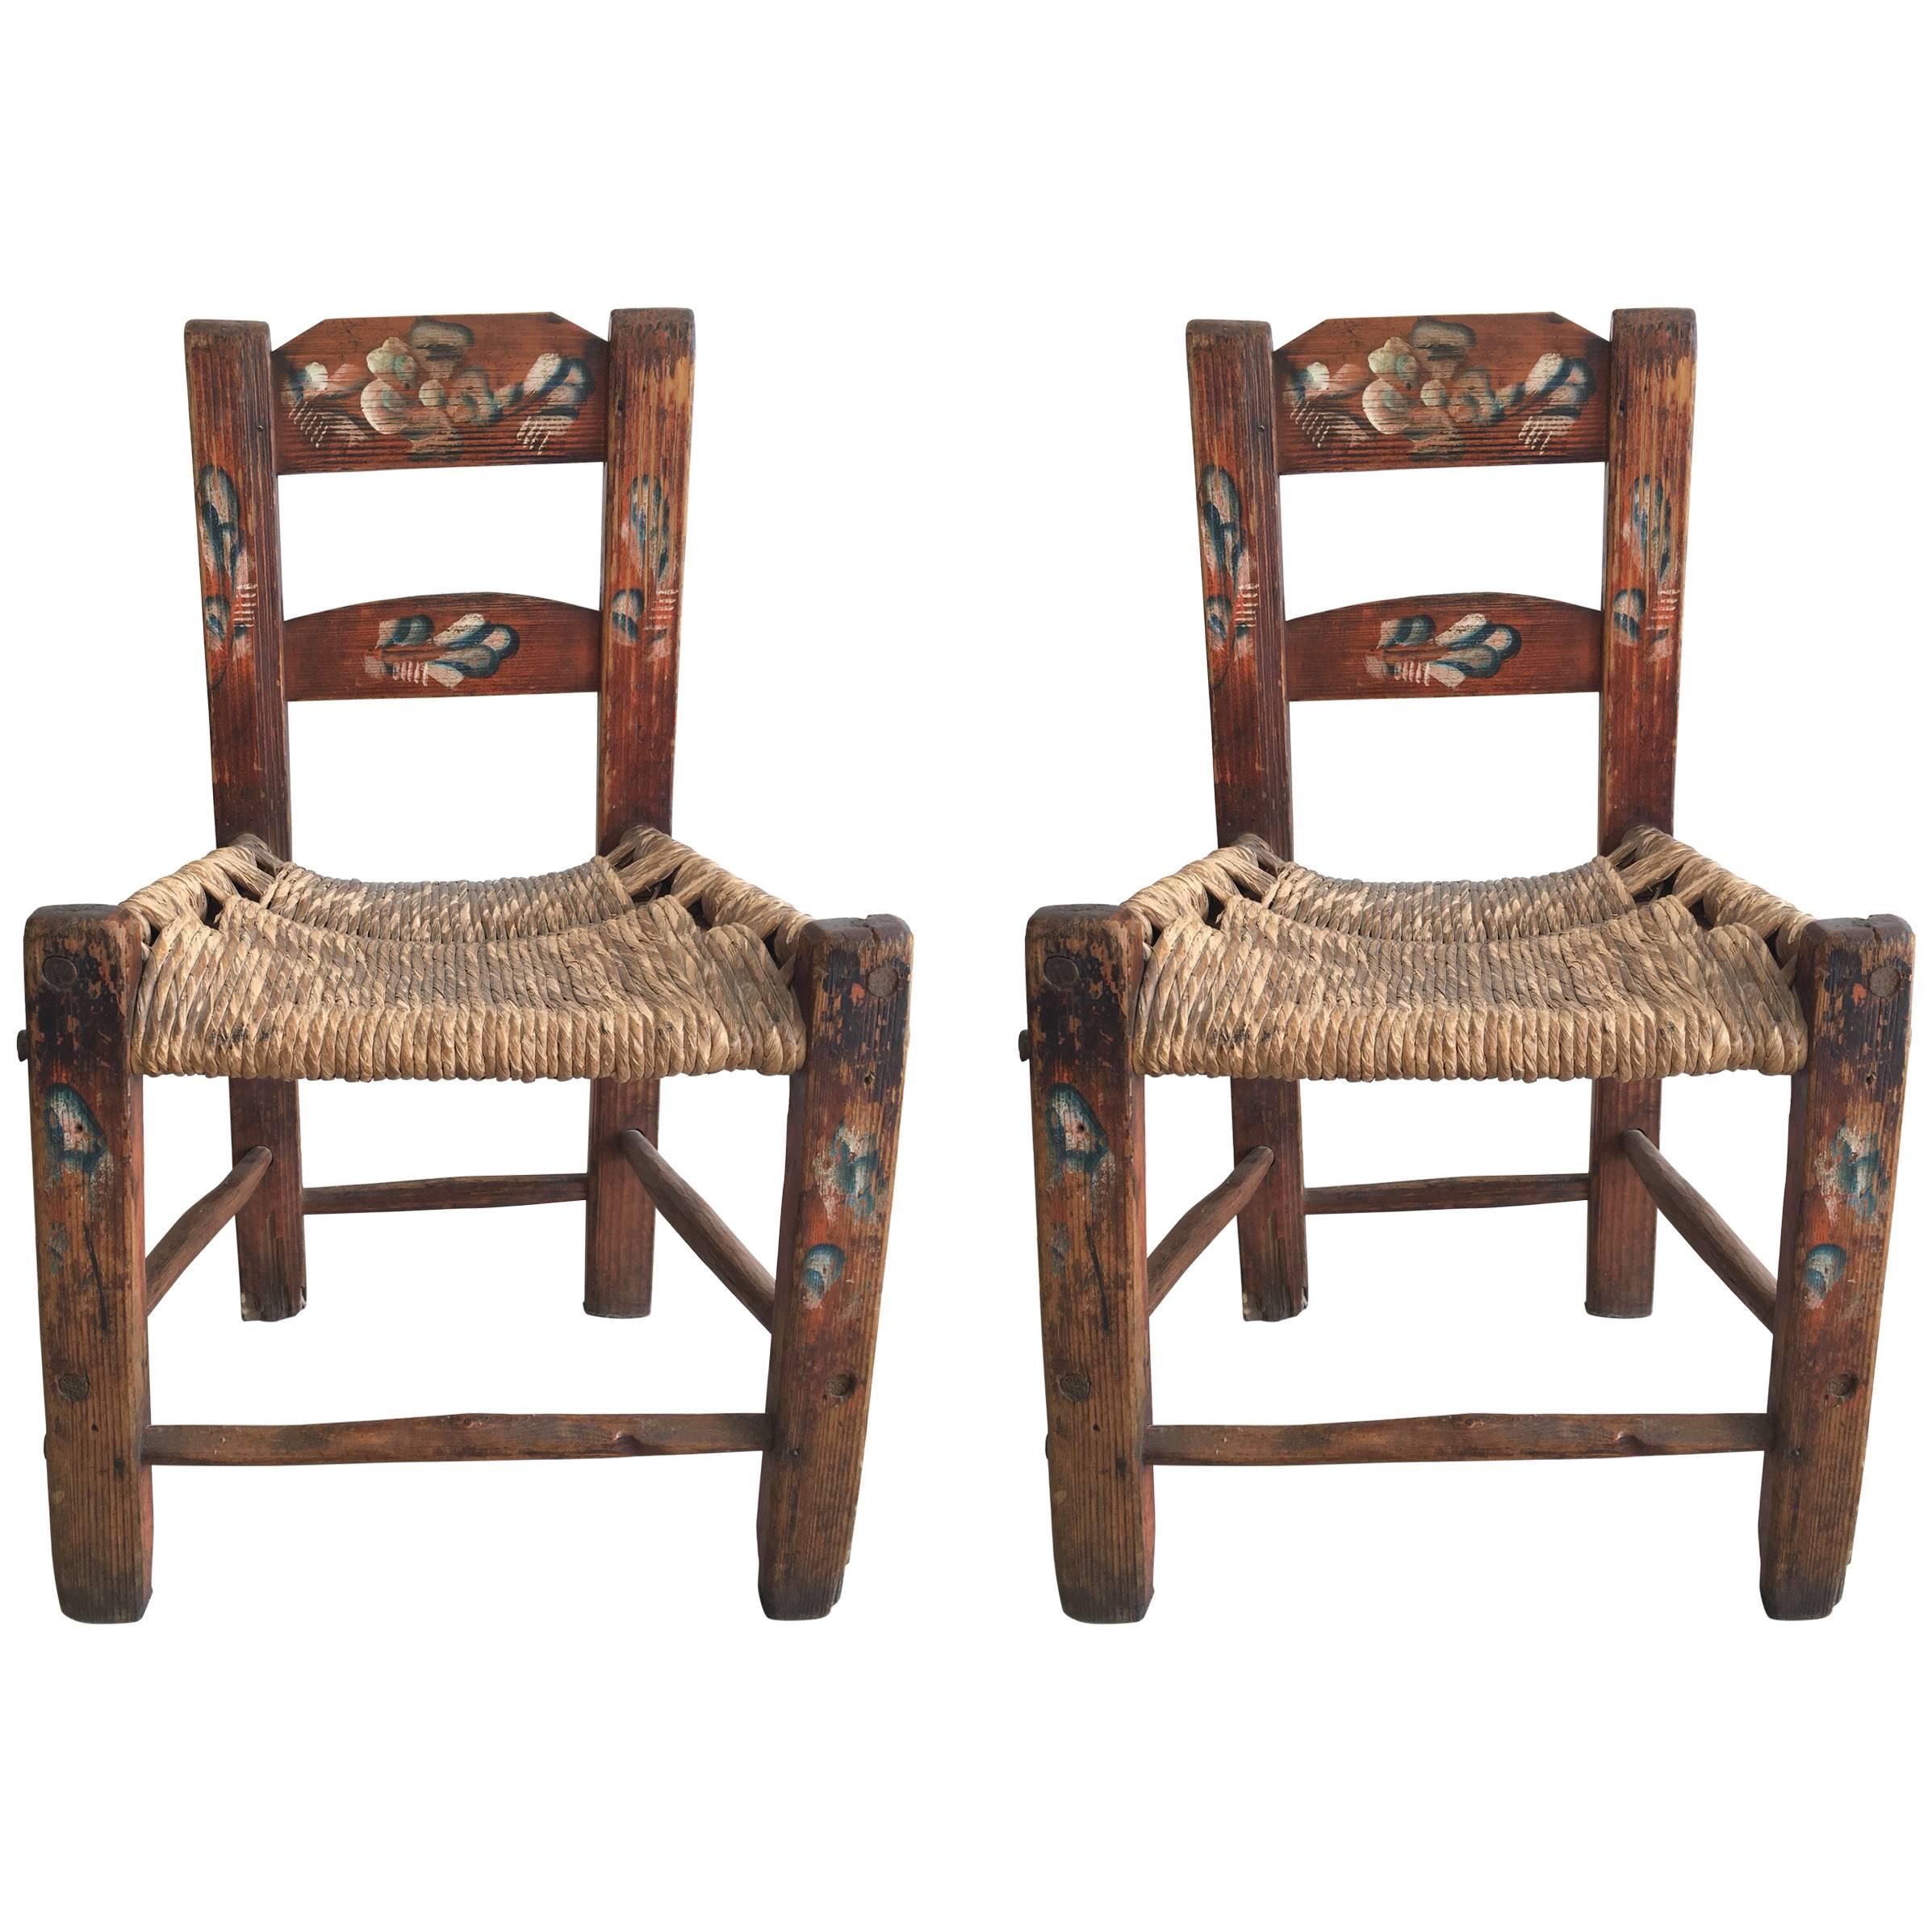 Quiroga Chairs from Mexico